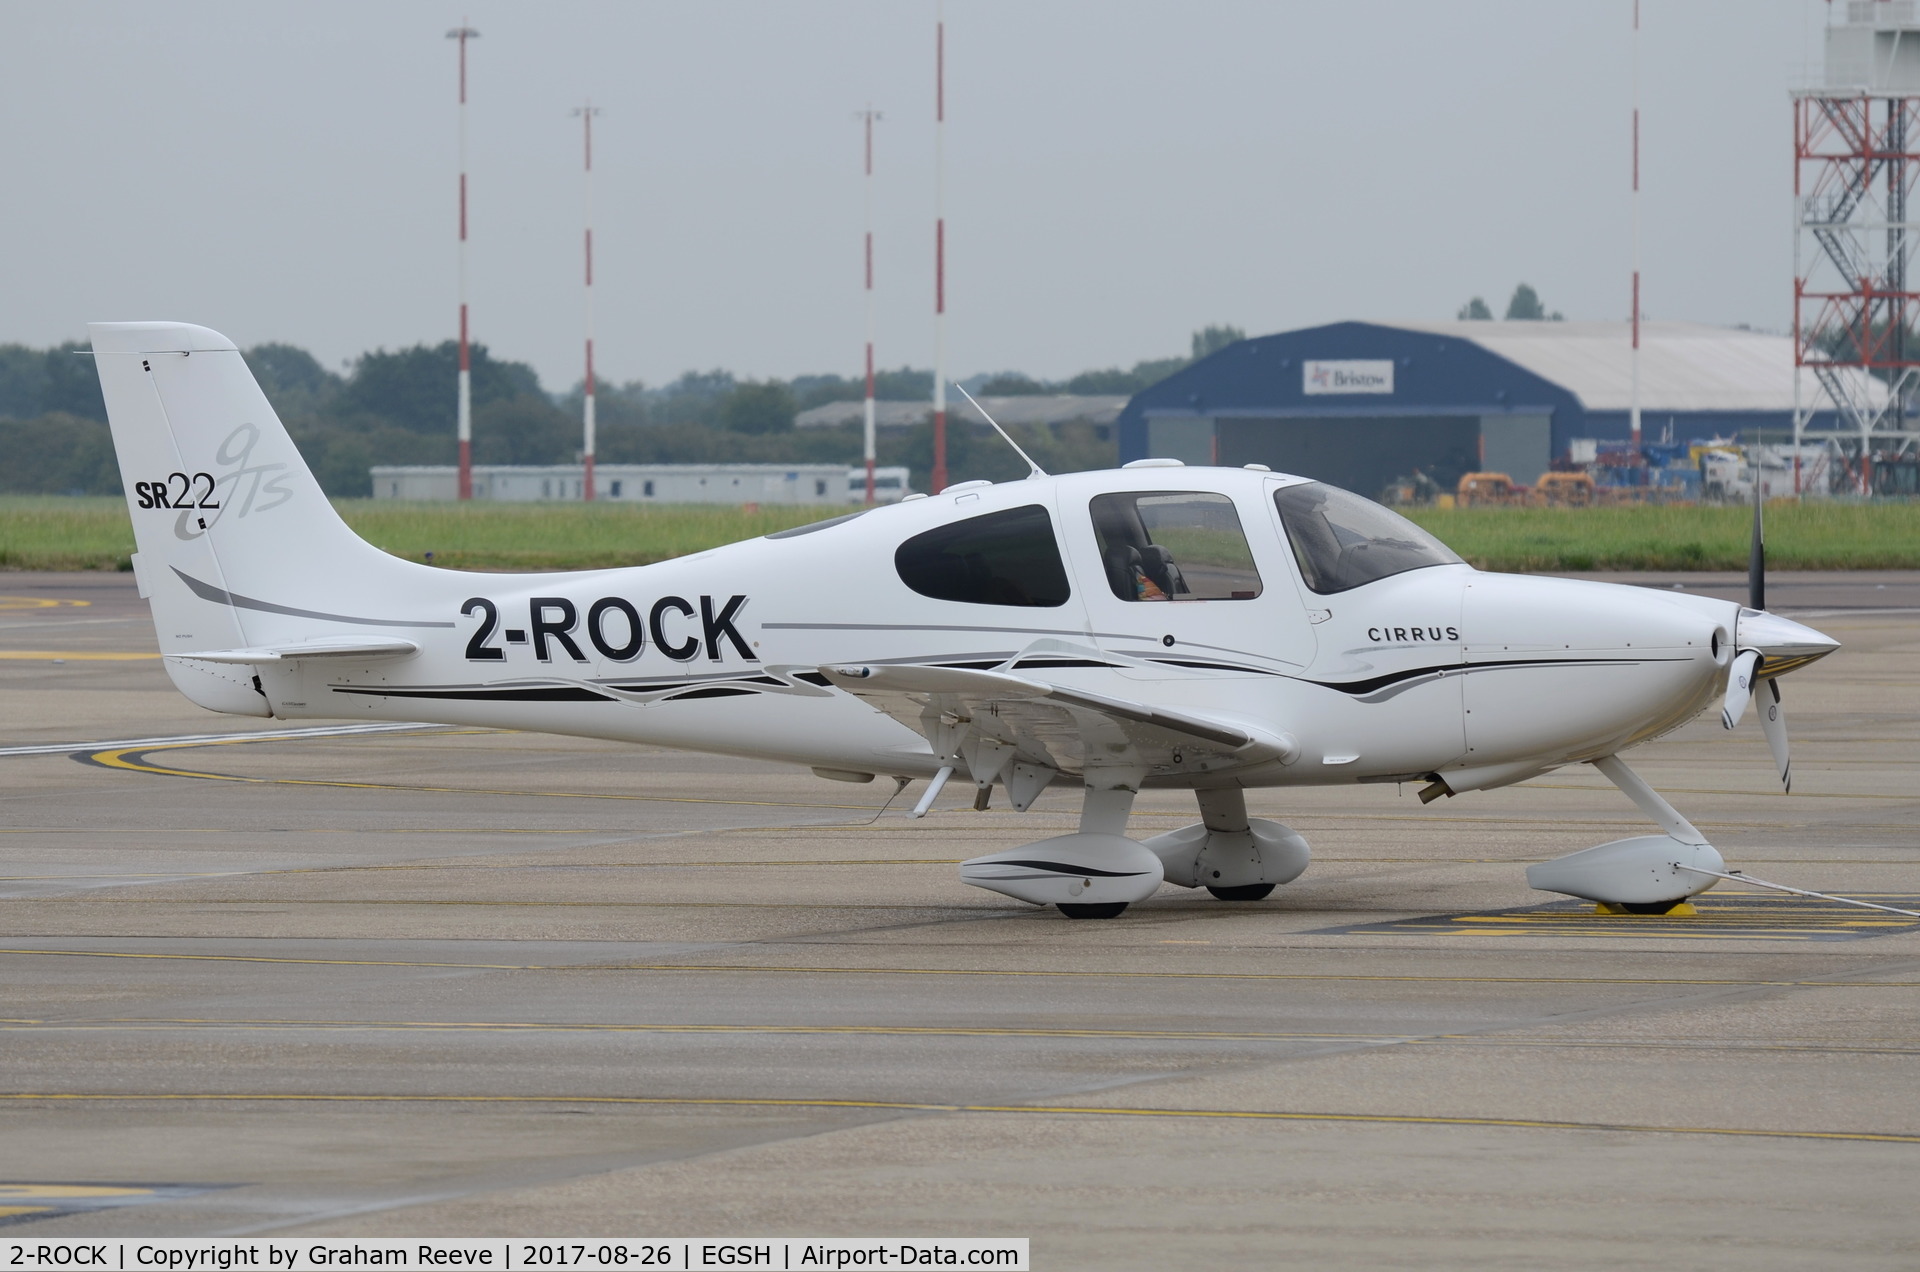 2-ROCK, 2005 Cirrus SR22 GTS C/N 1313, Parked at Norwich.